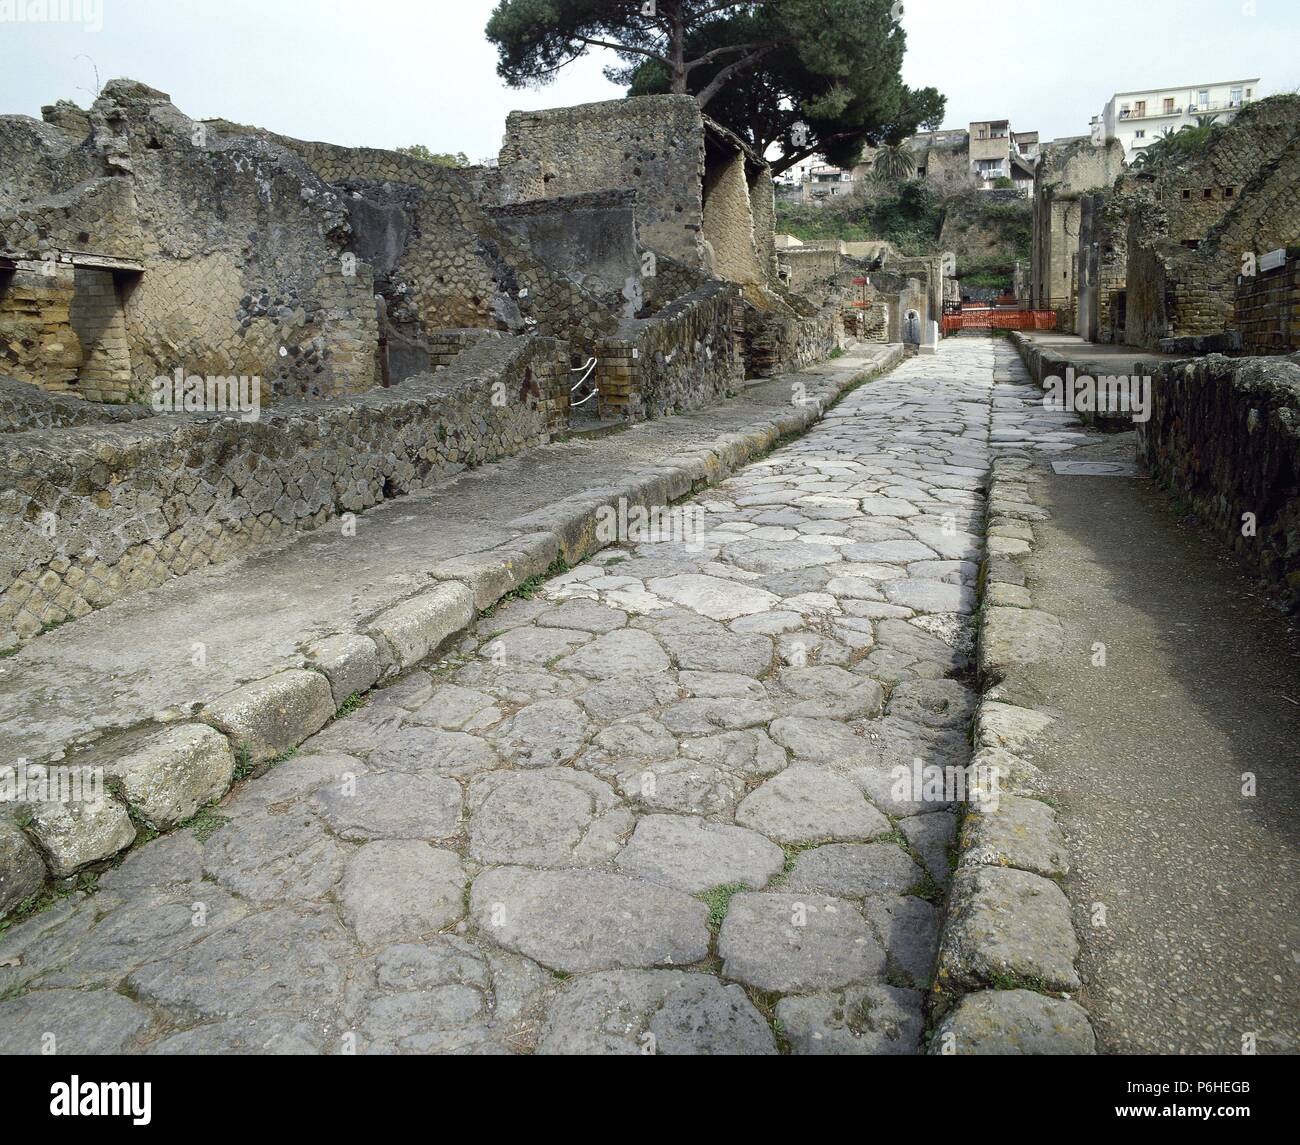 Italy. Herculaneum. Ancient Roman town destroyed by volcanic pyroclastic flows in 70 AD. View of Cardo IV. Campania. Stock Photo